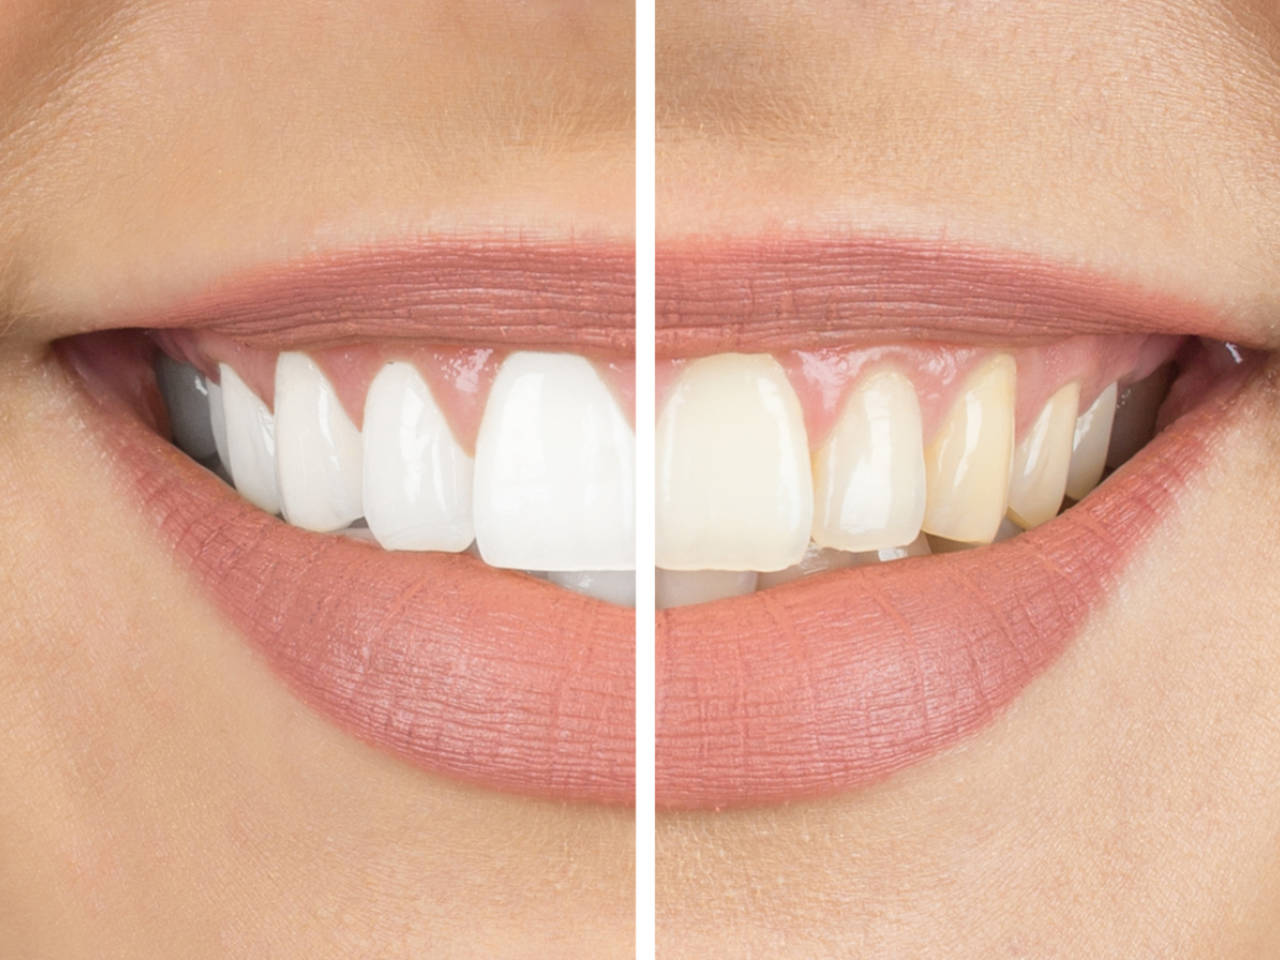 The Truth about Teeth Whiteners - Should You Be Using Them?